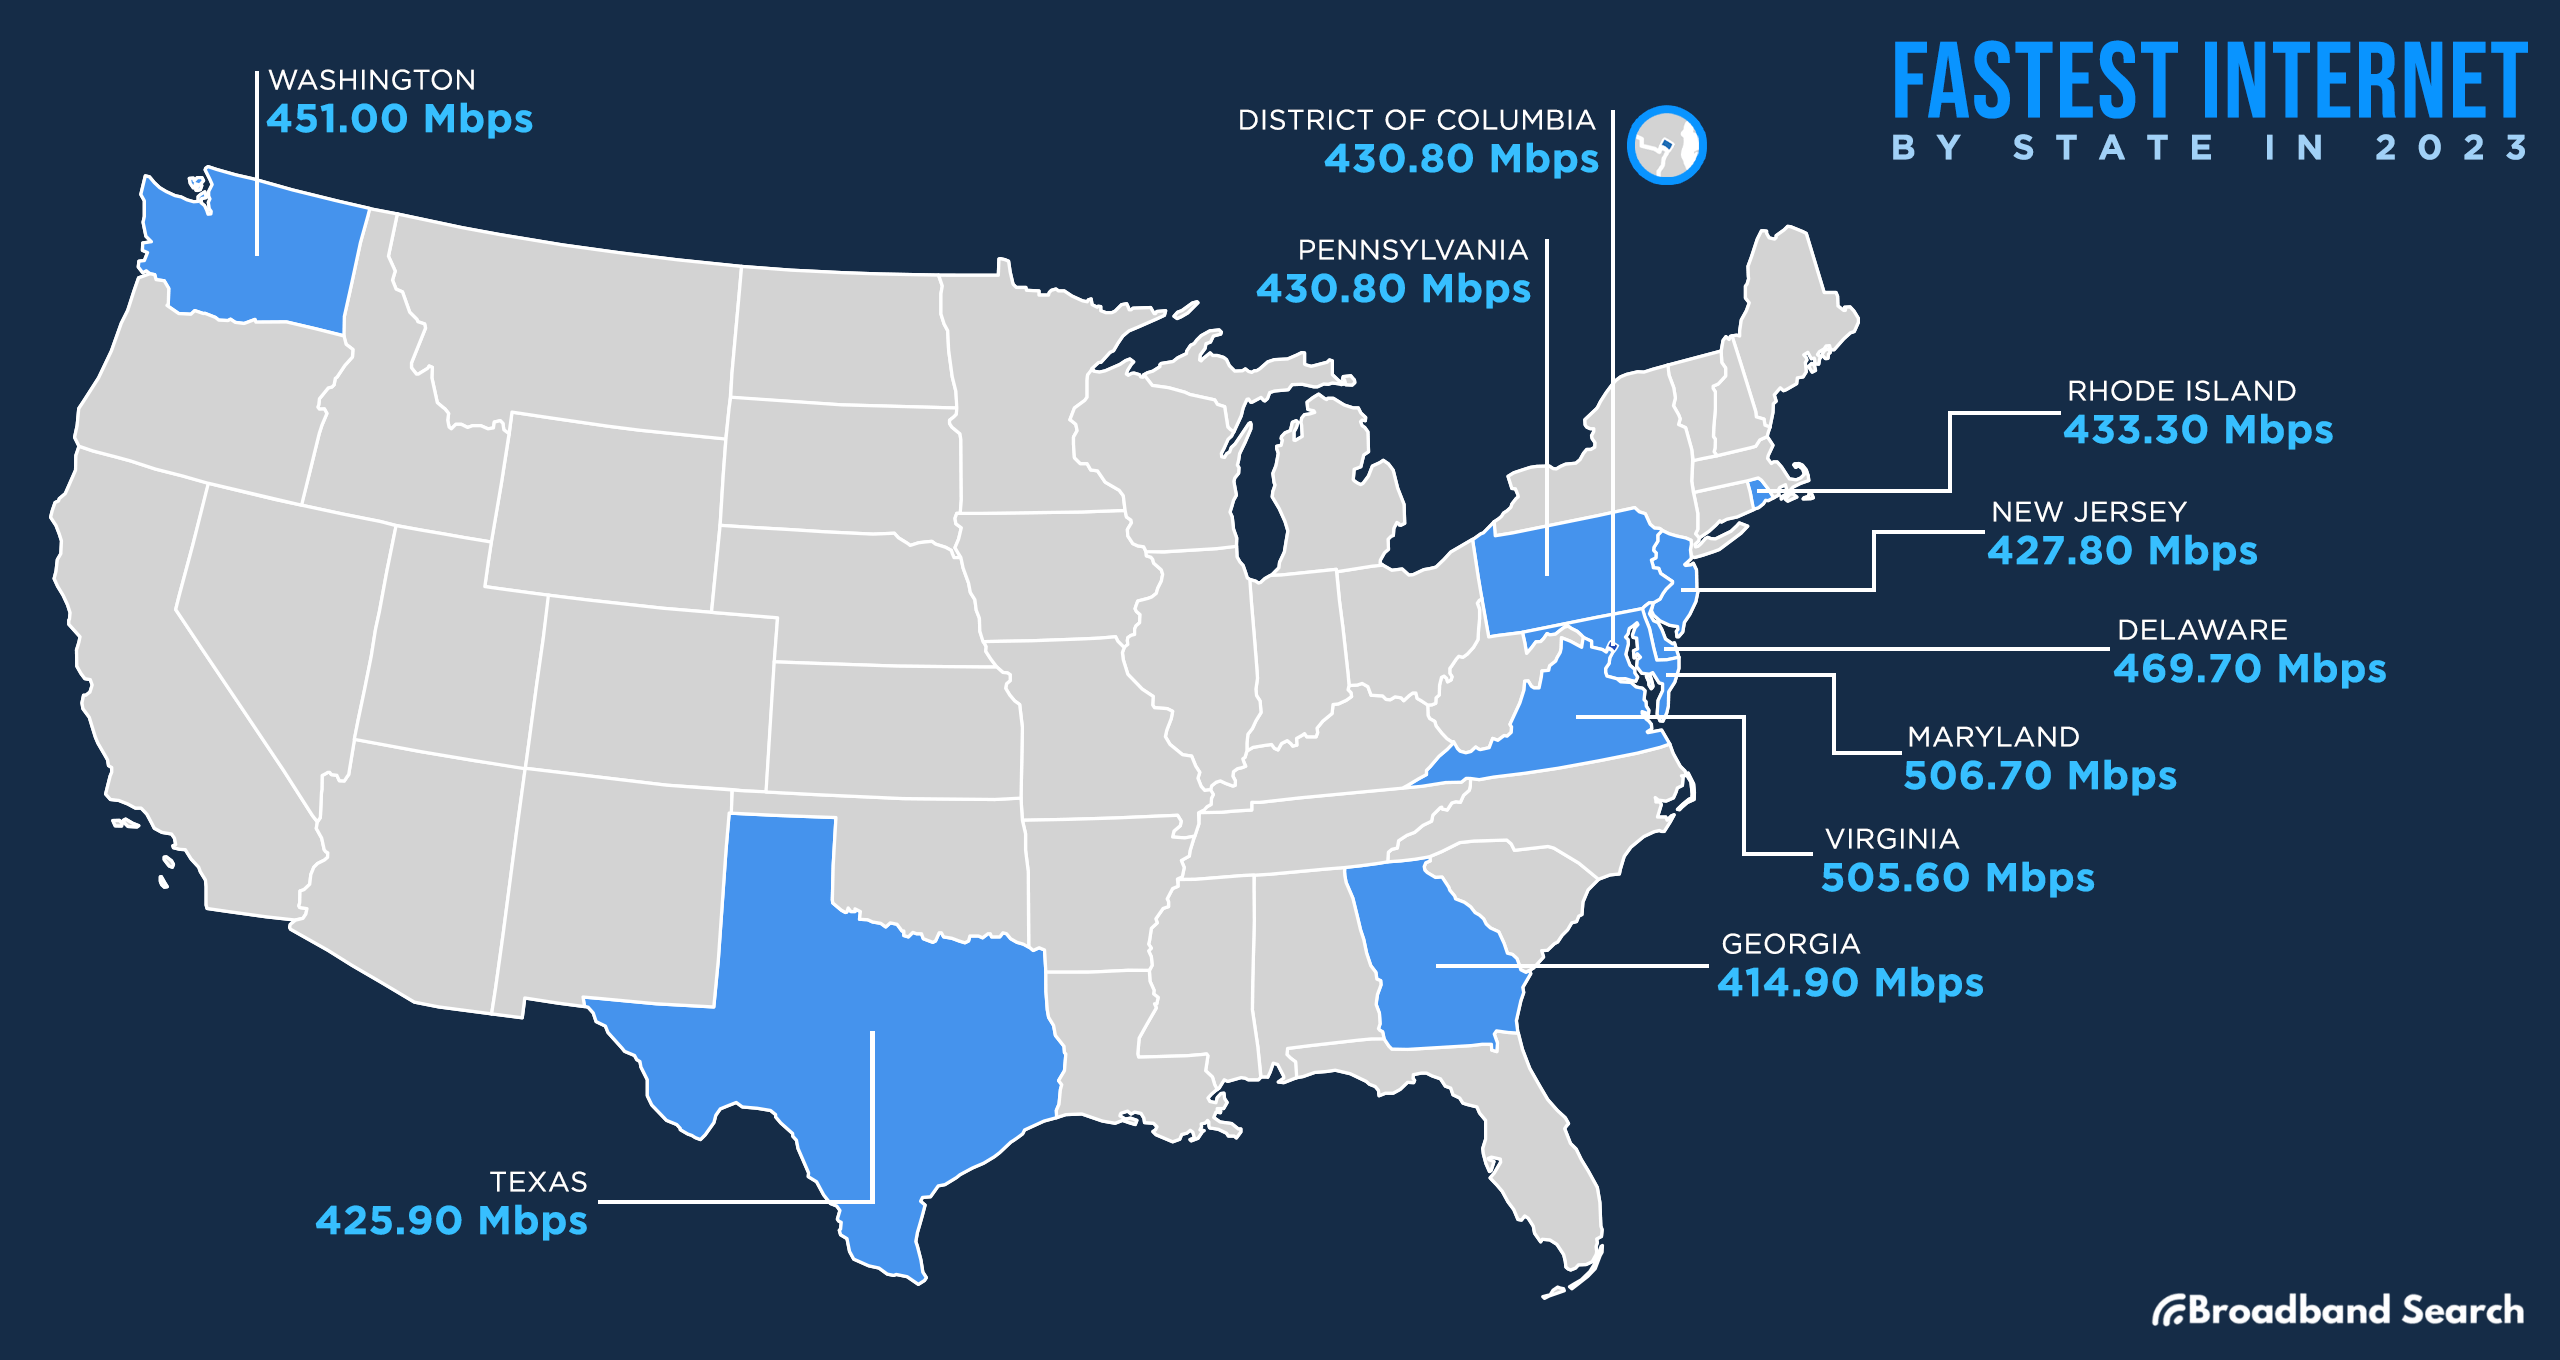 Fastest Internet speed by state